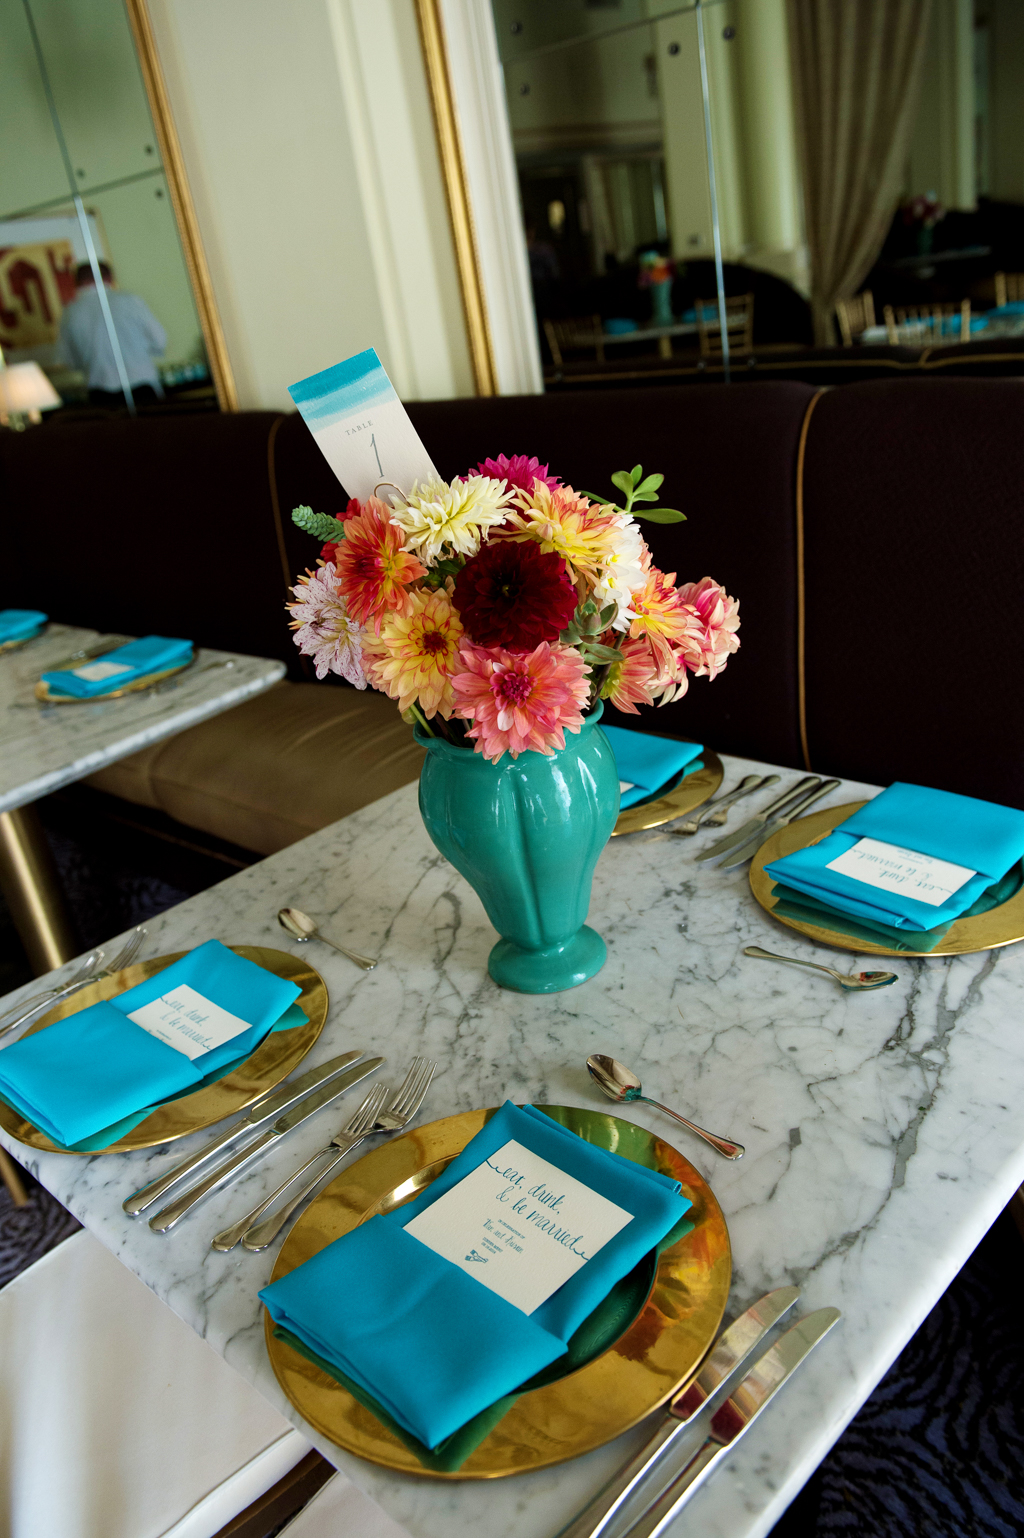 teal vintage vases hold orange yellow salmon and dark red colored flowers on a table with gold plates and turquoise napkins